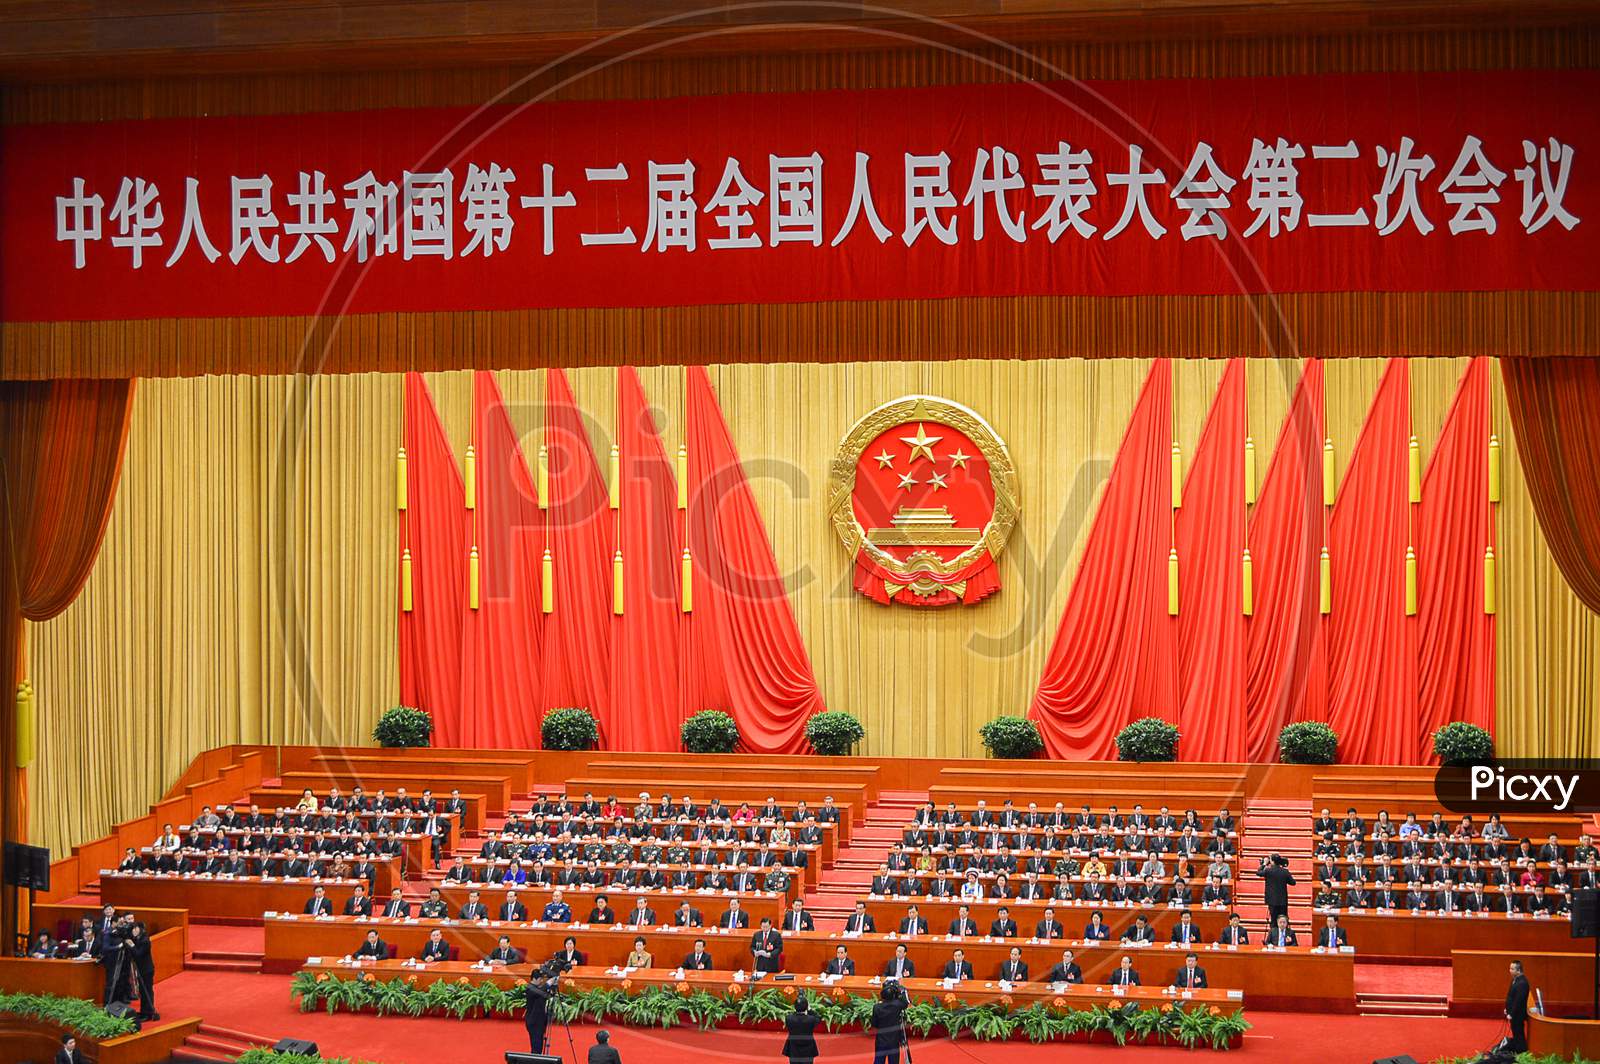 Central Committee Of The Communist Party Of China, Top Leadership Of The Communist Party Of China At A Session In The Great Hall Of The People, Beijing